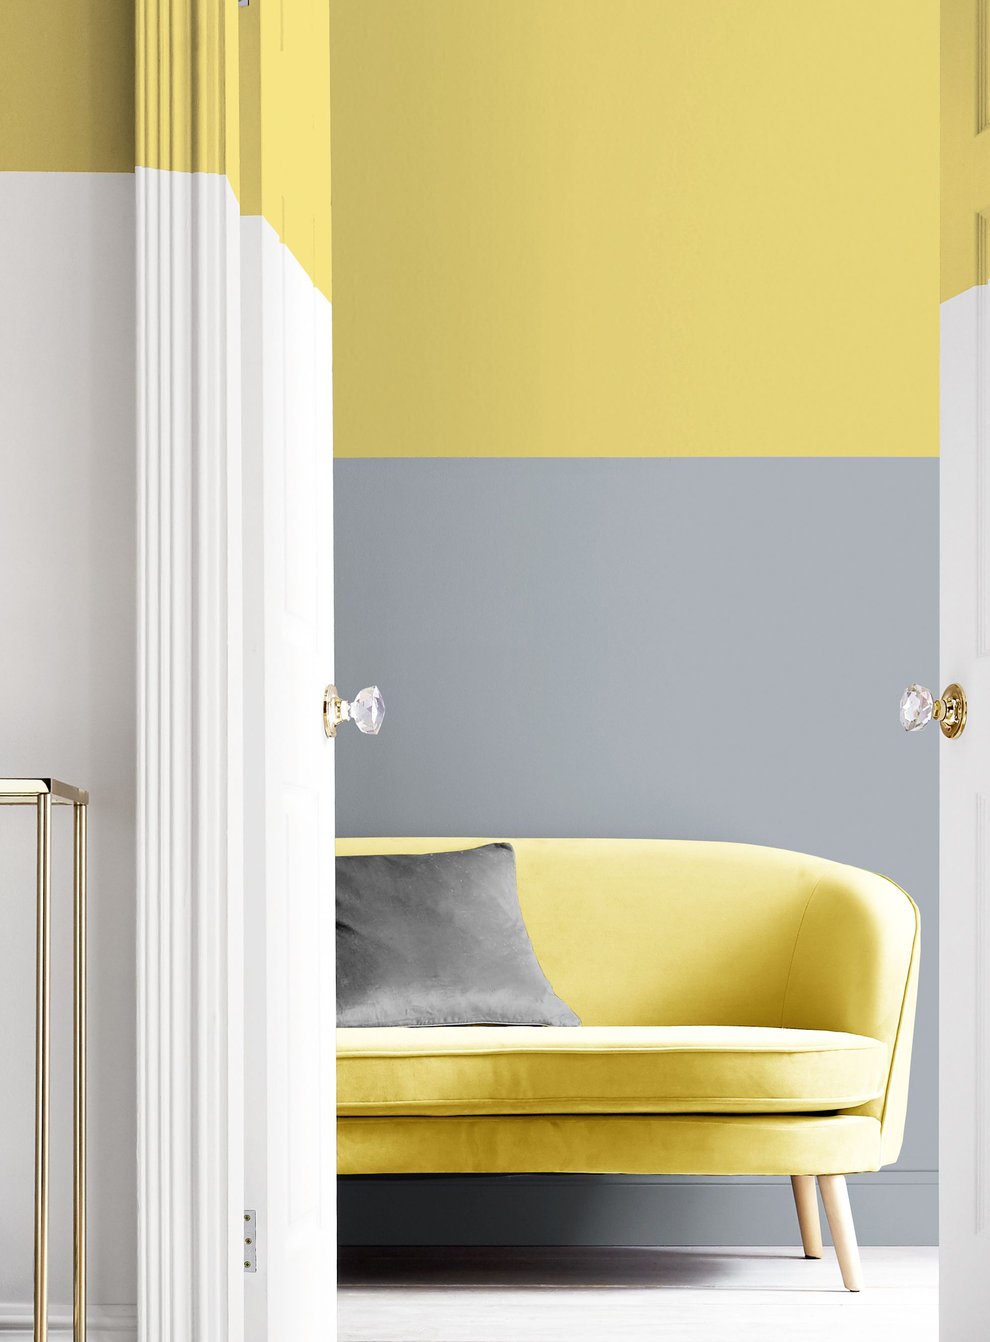 A stylish home interior featuring white, yellow and grey paint effects on the walls